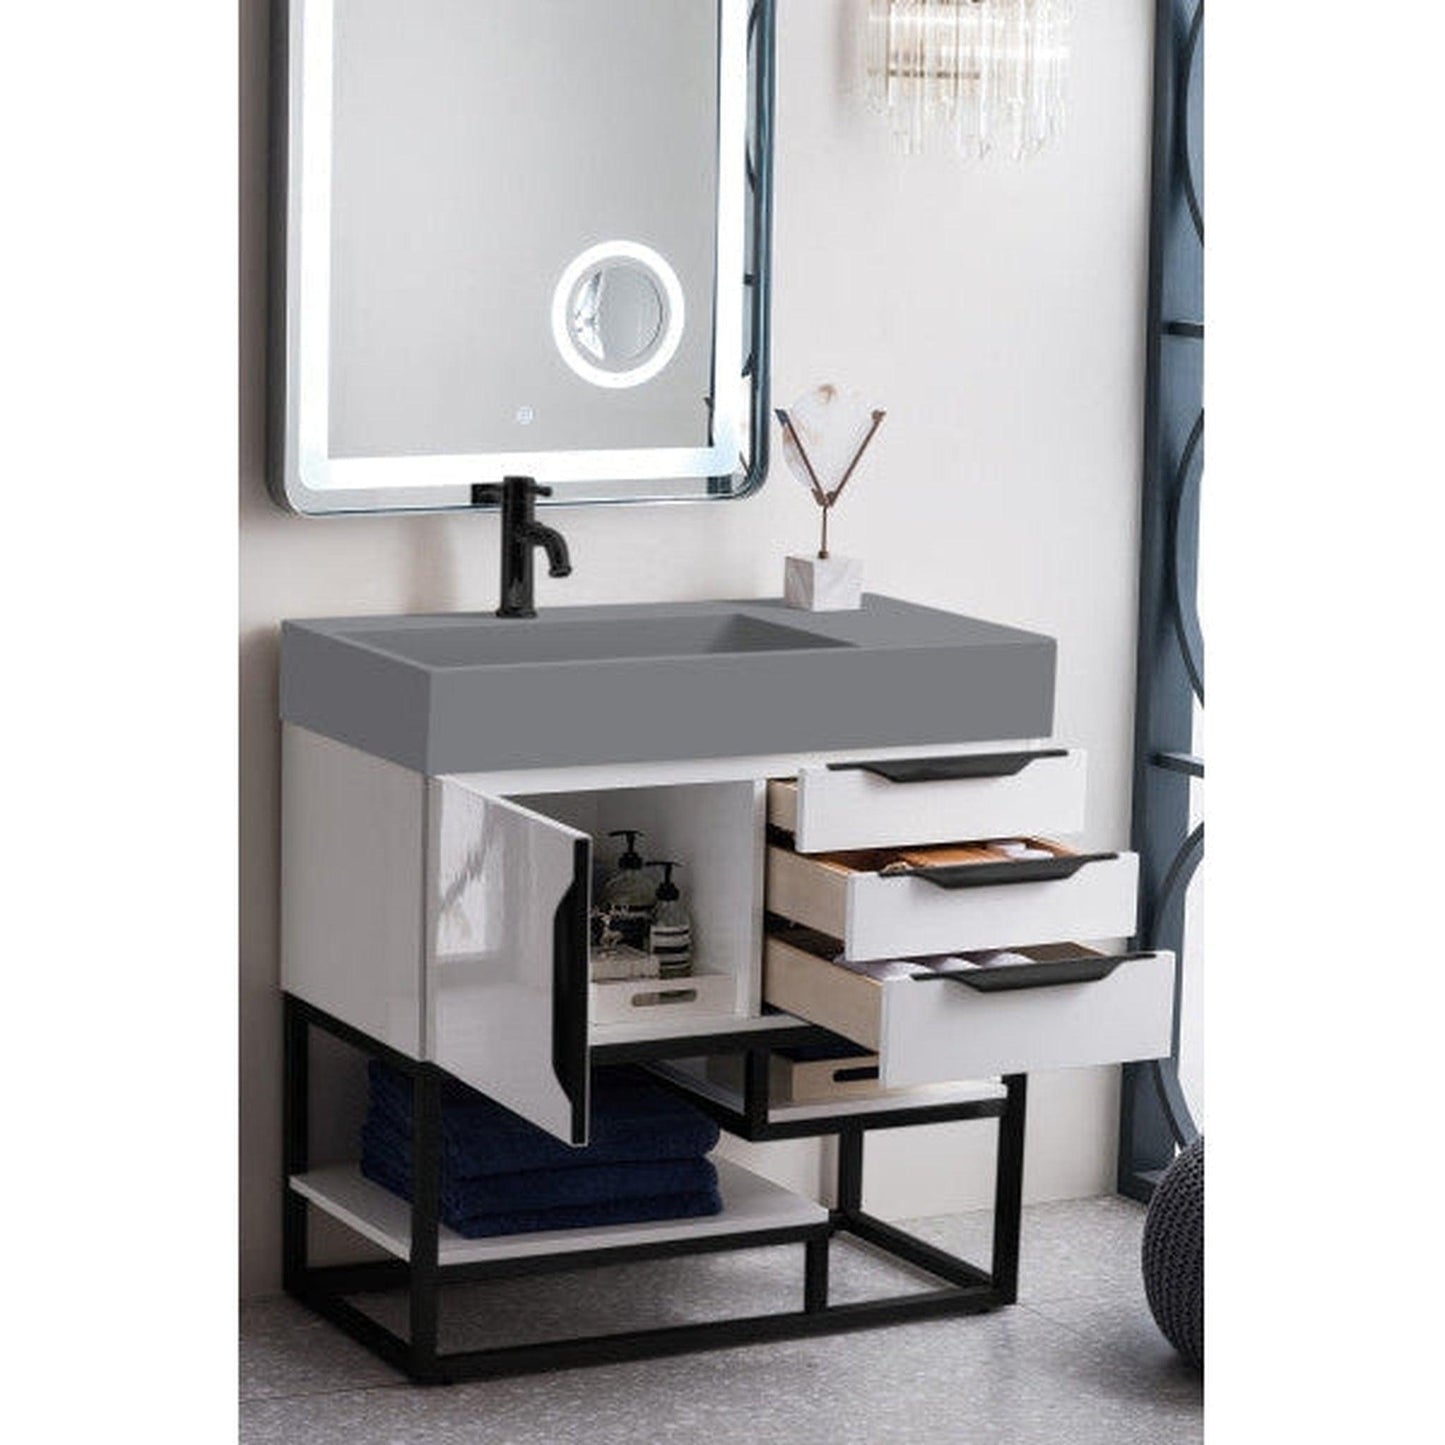 James Martin Columbia 36" Single Glossy White Bathroom Vanity With Matte Black Hardware and 6" Glossy Dusk Gray Composite Countertop